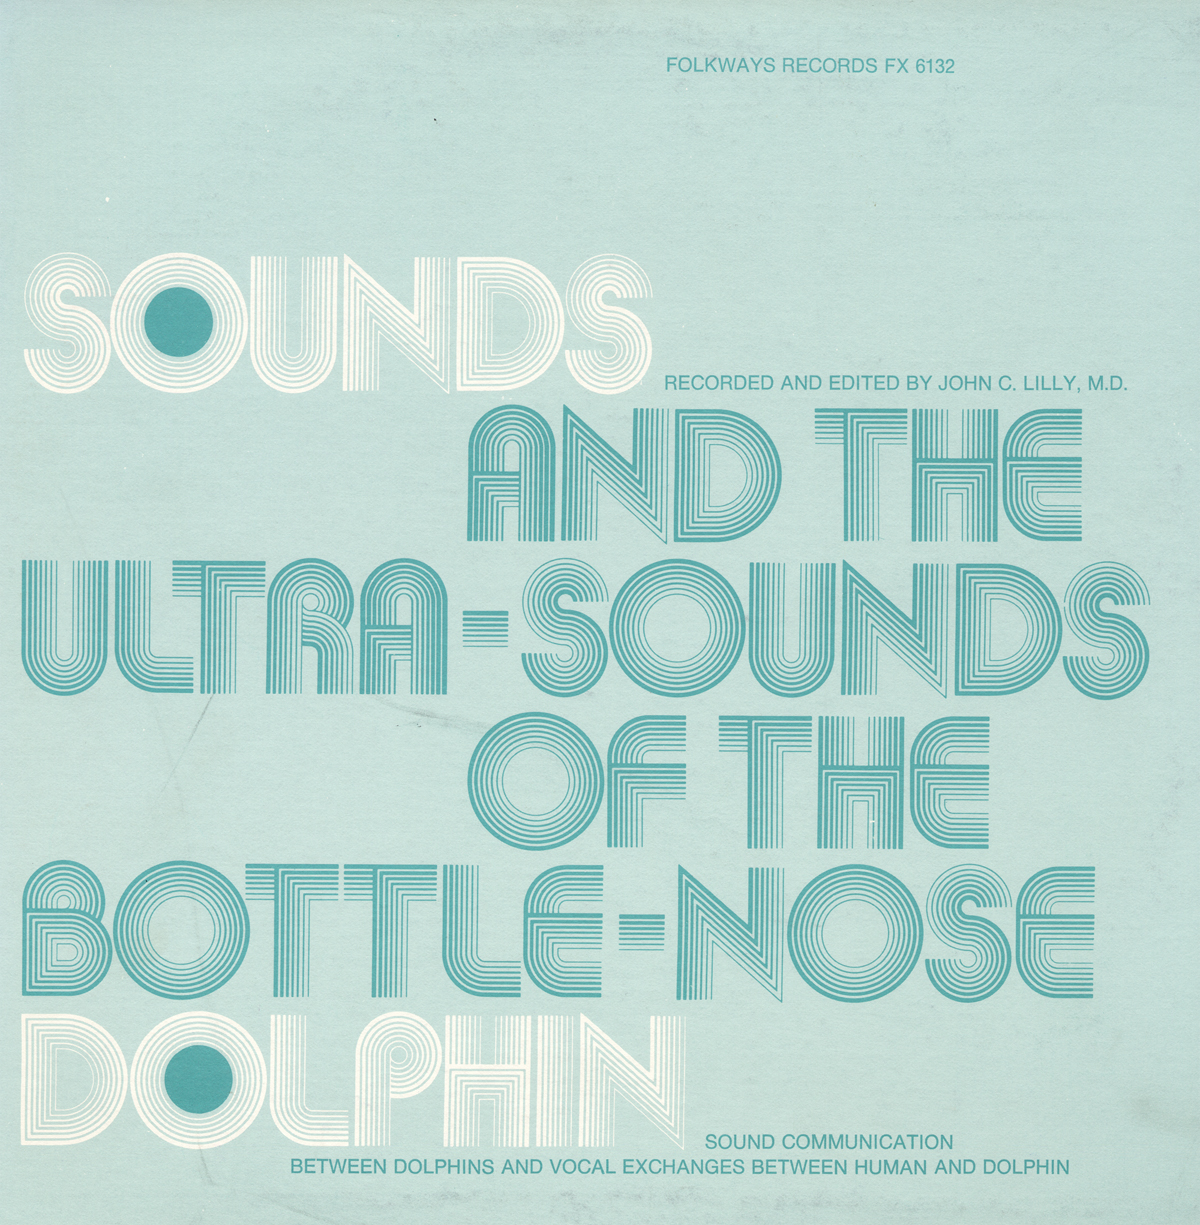 BOTTLE-NOSE DOLPHIN / VARIOUS